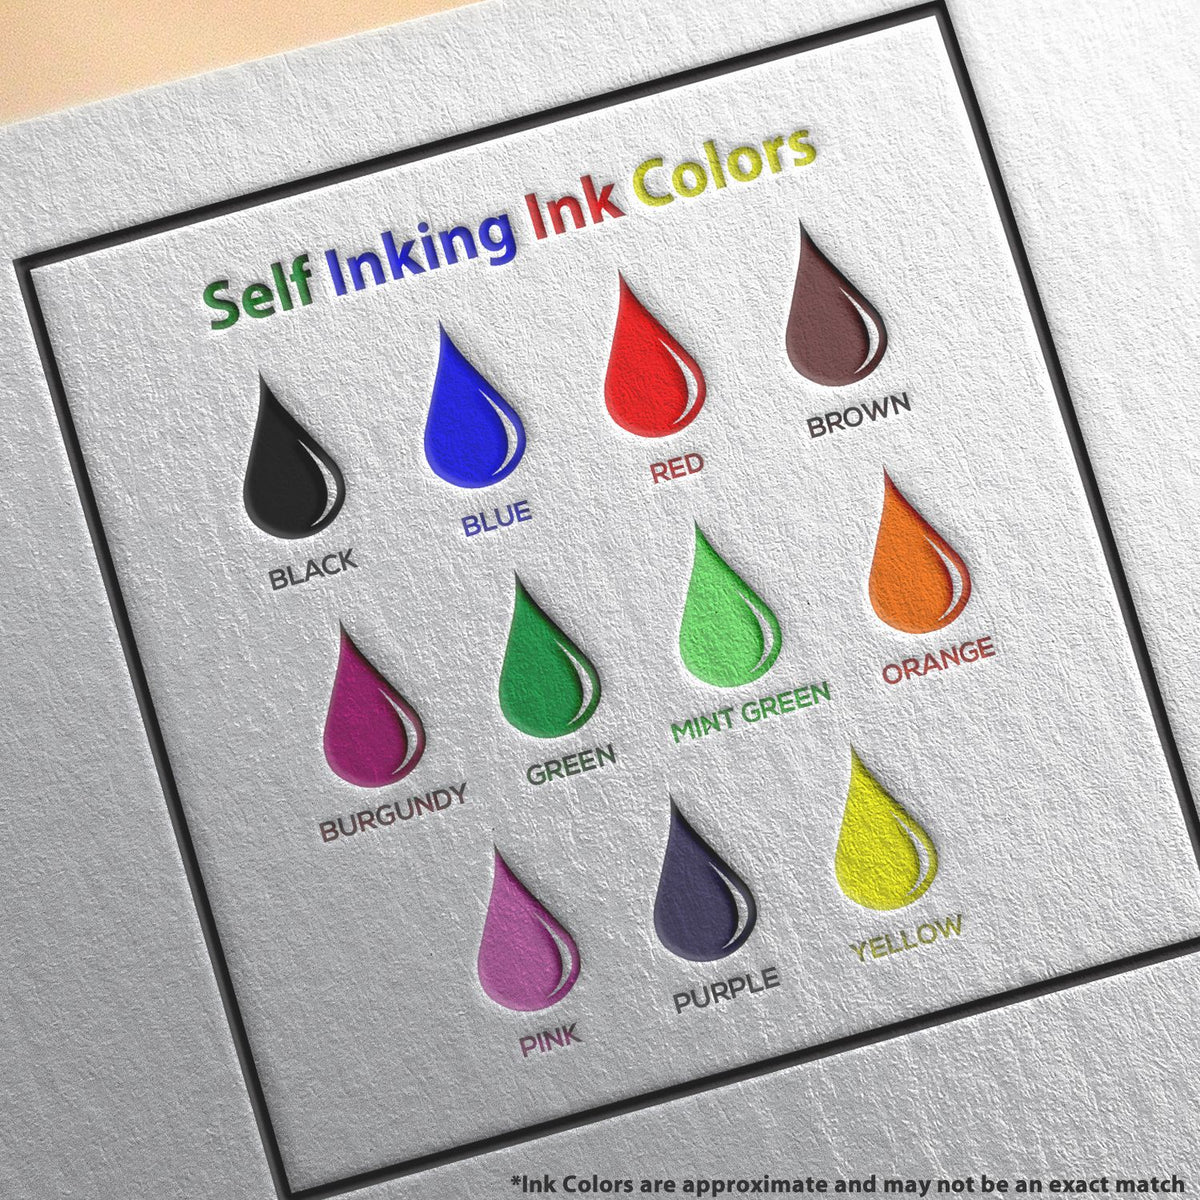 A picture showing the different ink colors or hues available for the Self-Inking Kansas Landscape Architect Stamp product.